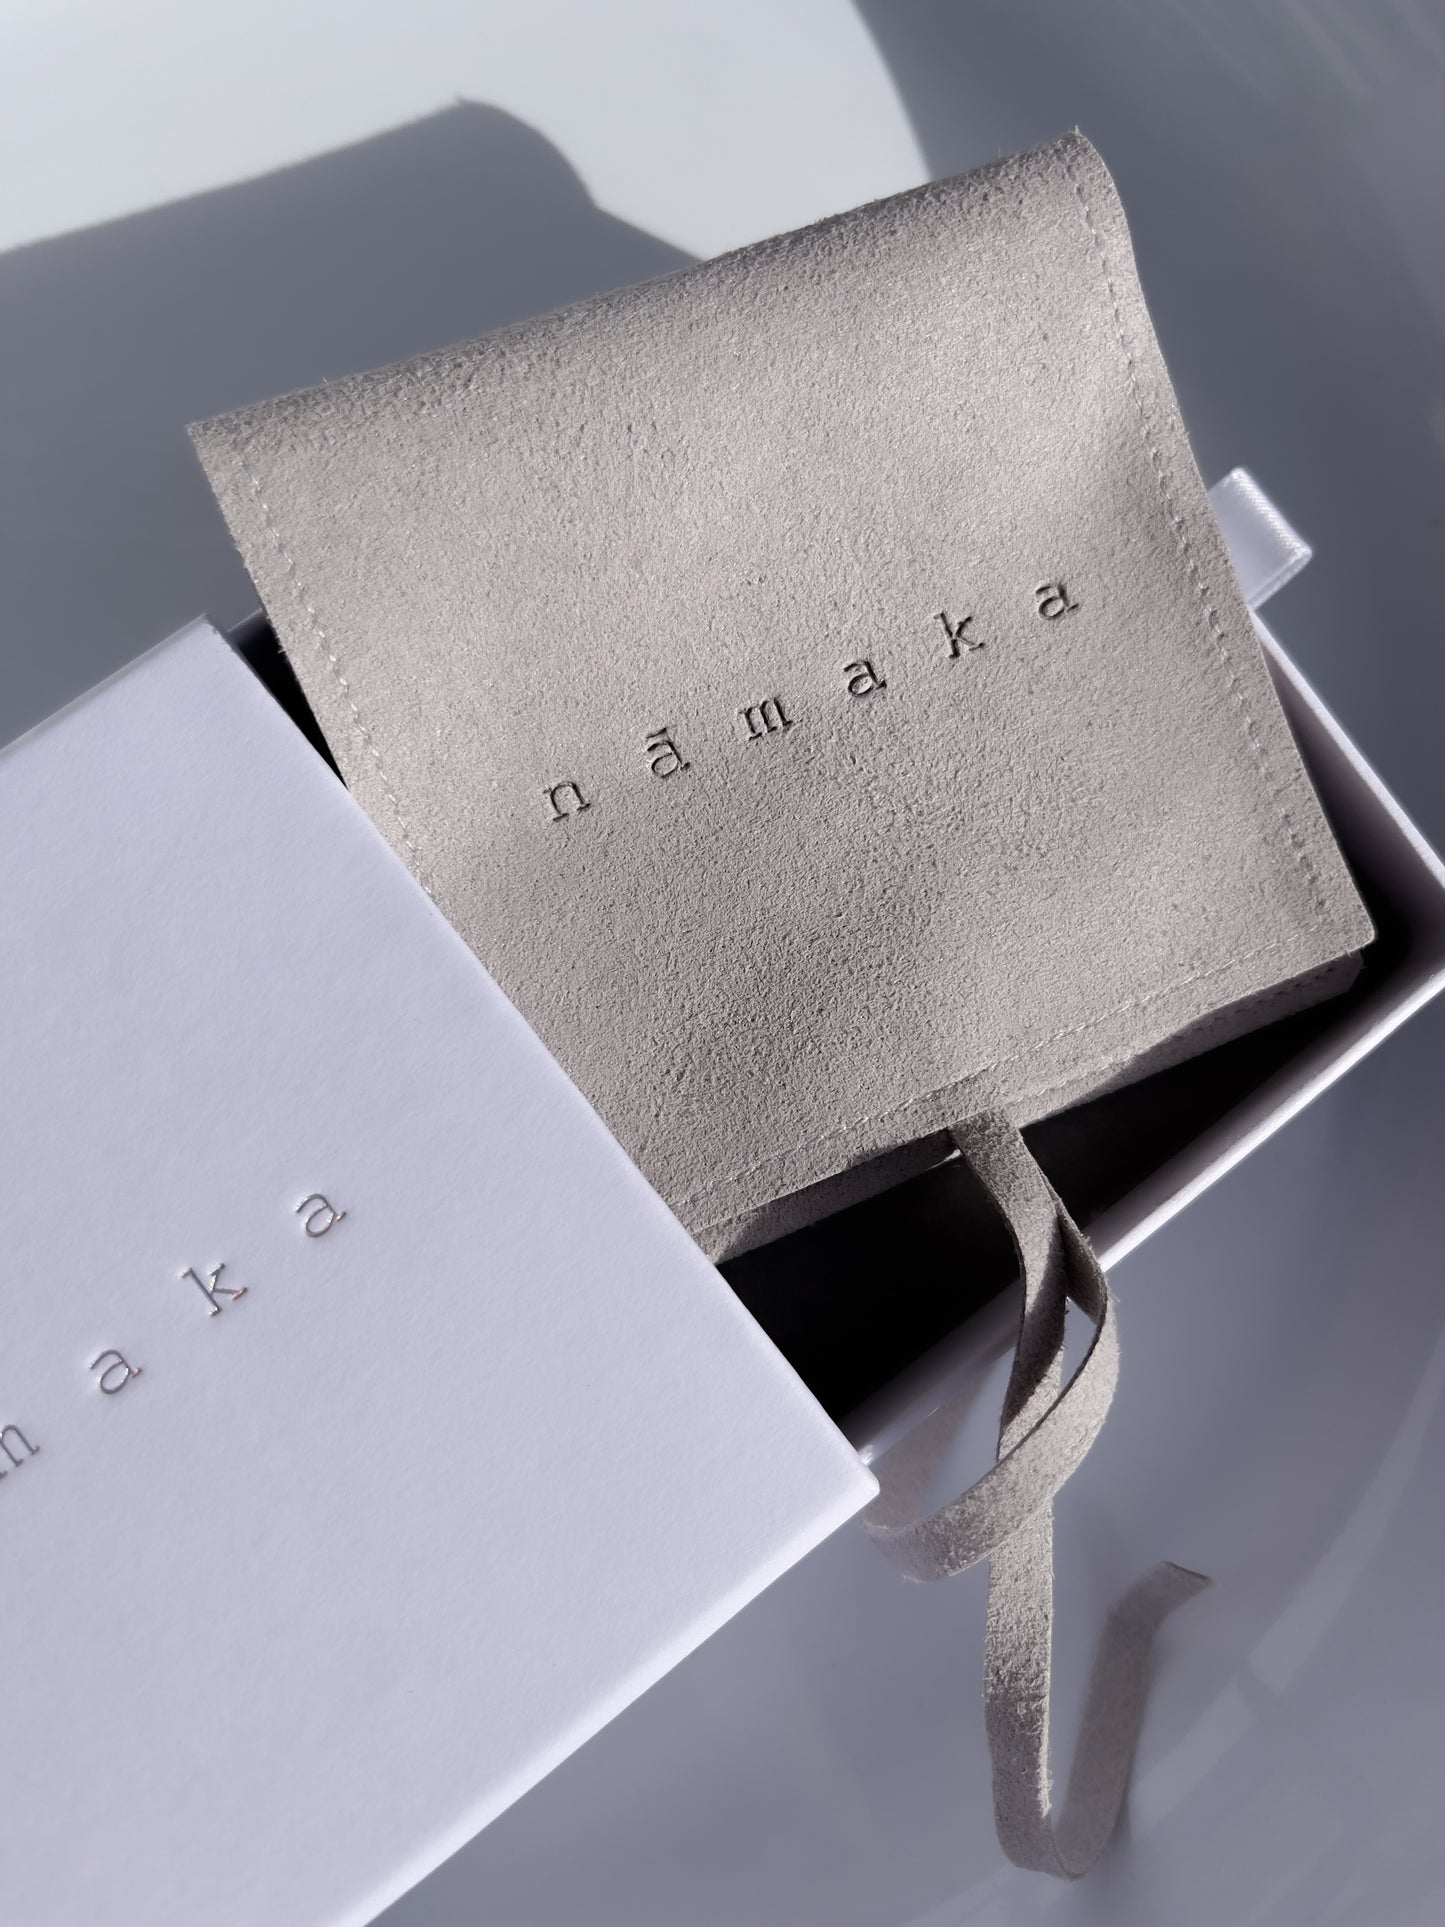 Packaging Designed and made by nāmaka